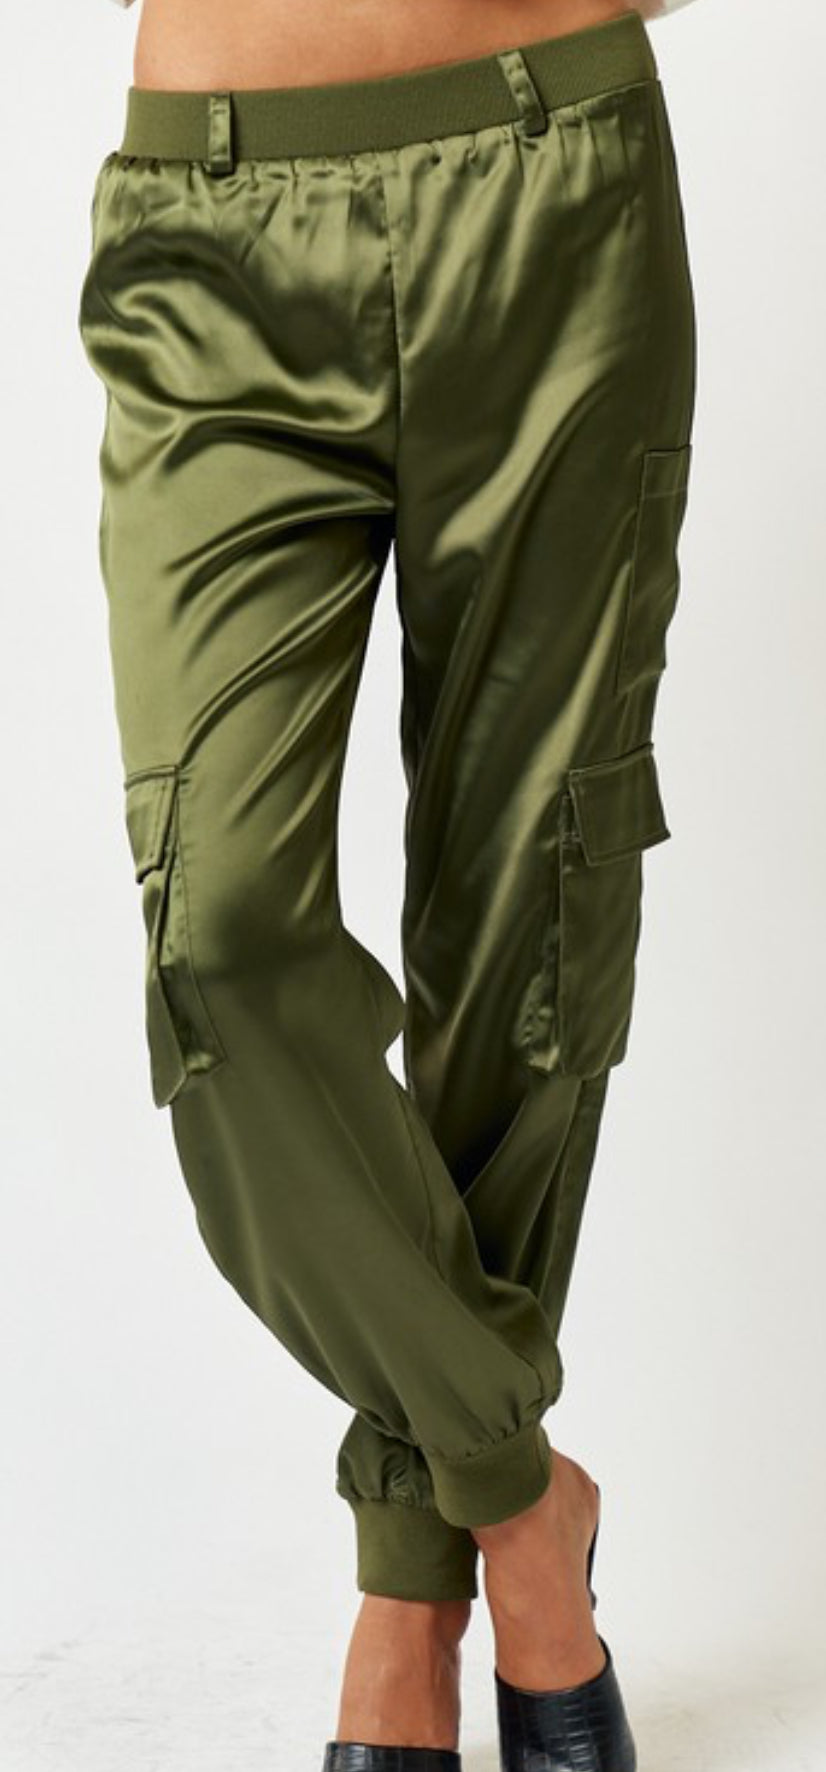 Olive joggers